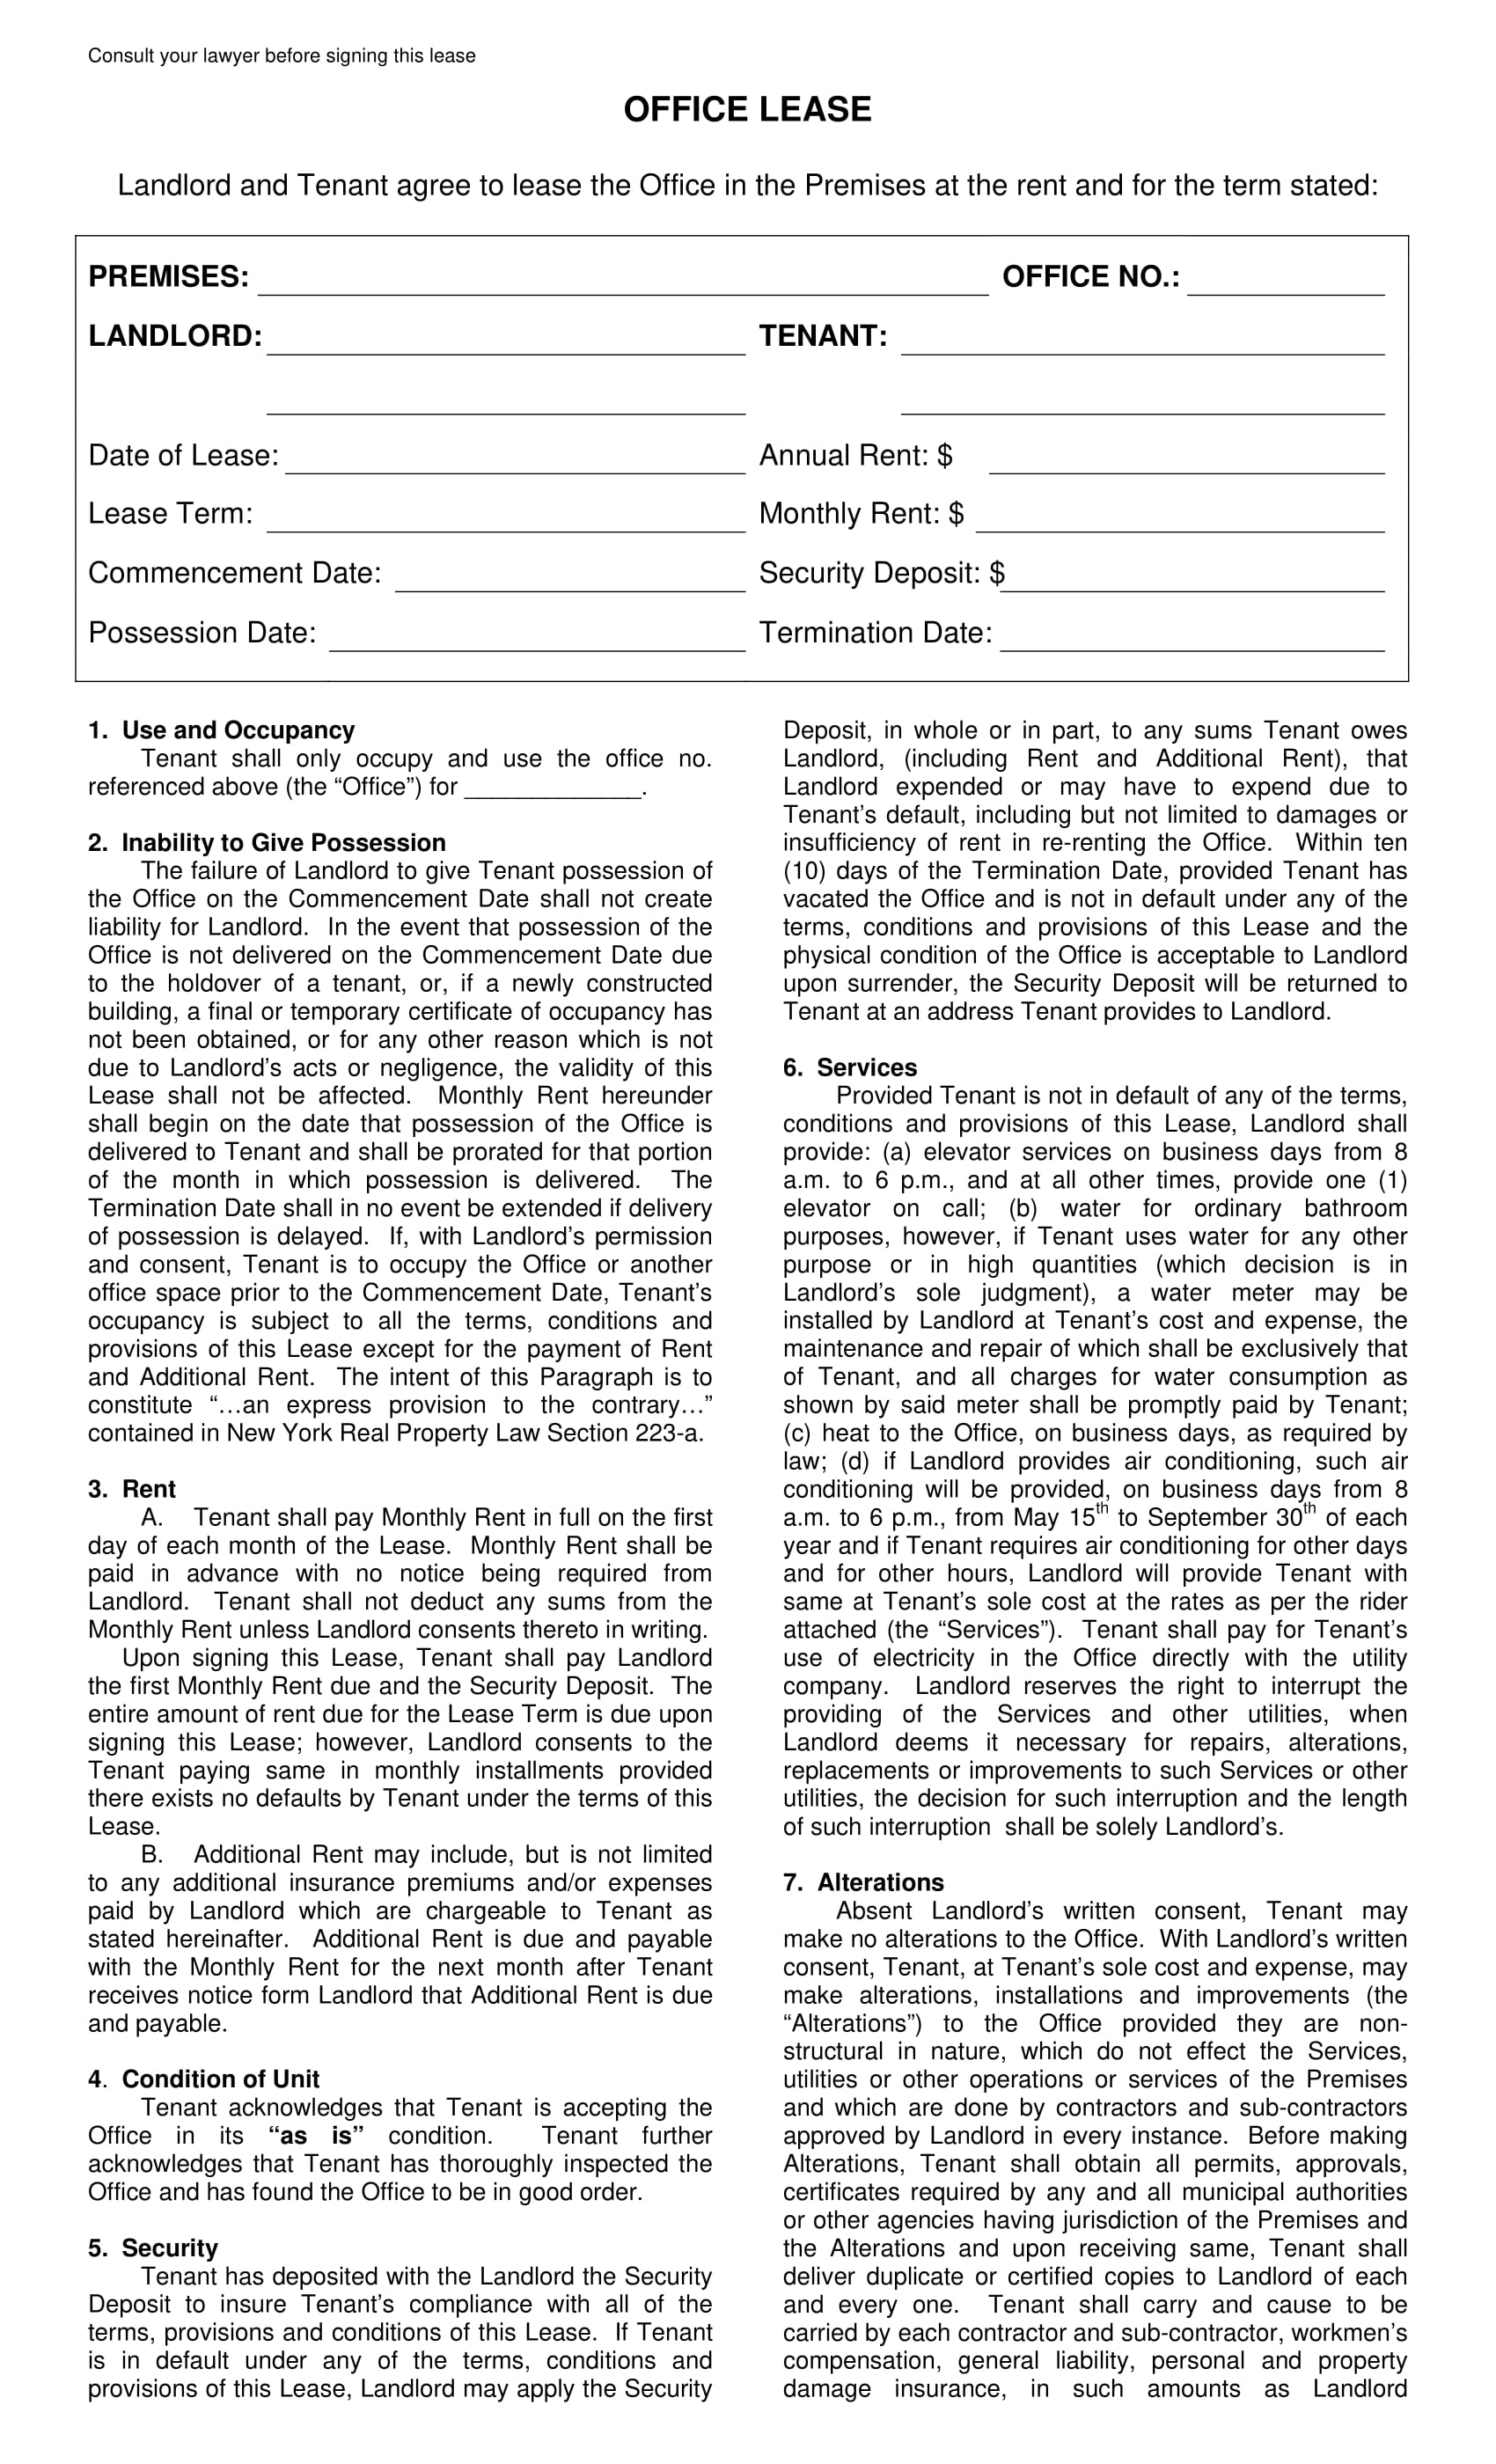 office lease agreement contract form 1